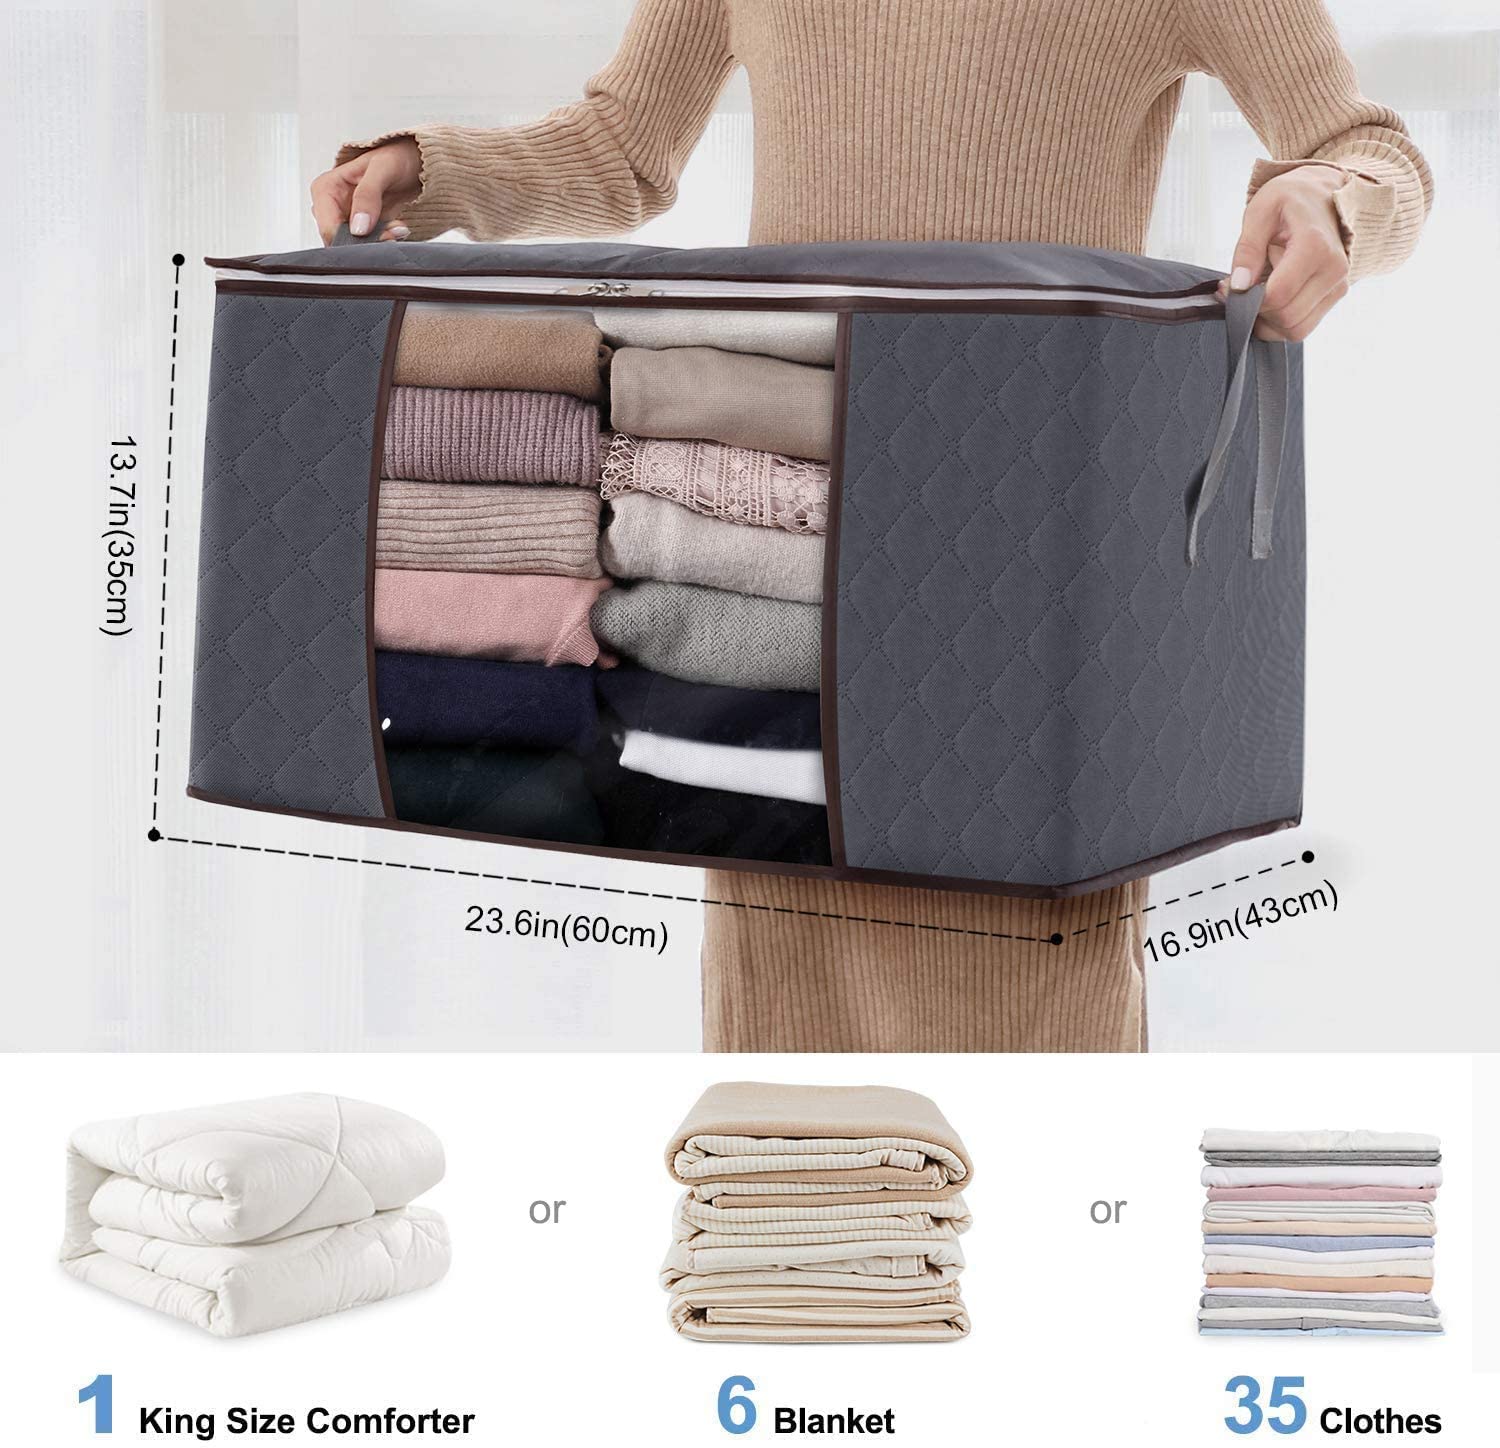 Lifewit Large Capacity Clothes Storage Bag 1 Home Organization Hacks, Ideas, and Tips from Lifewit - 3